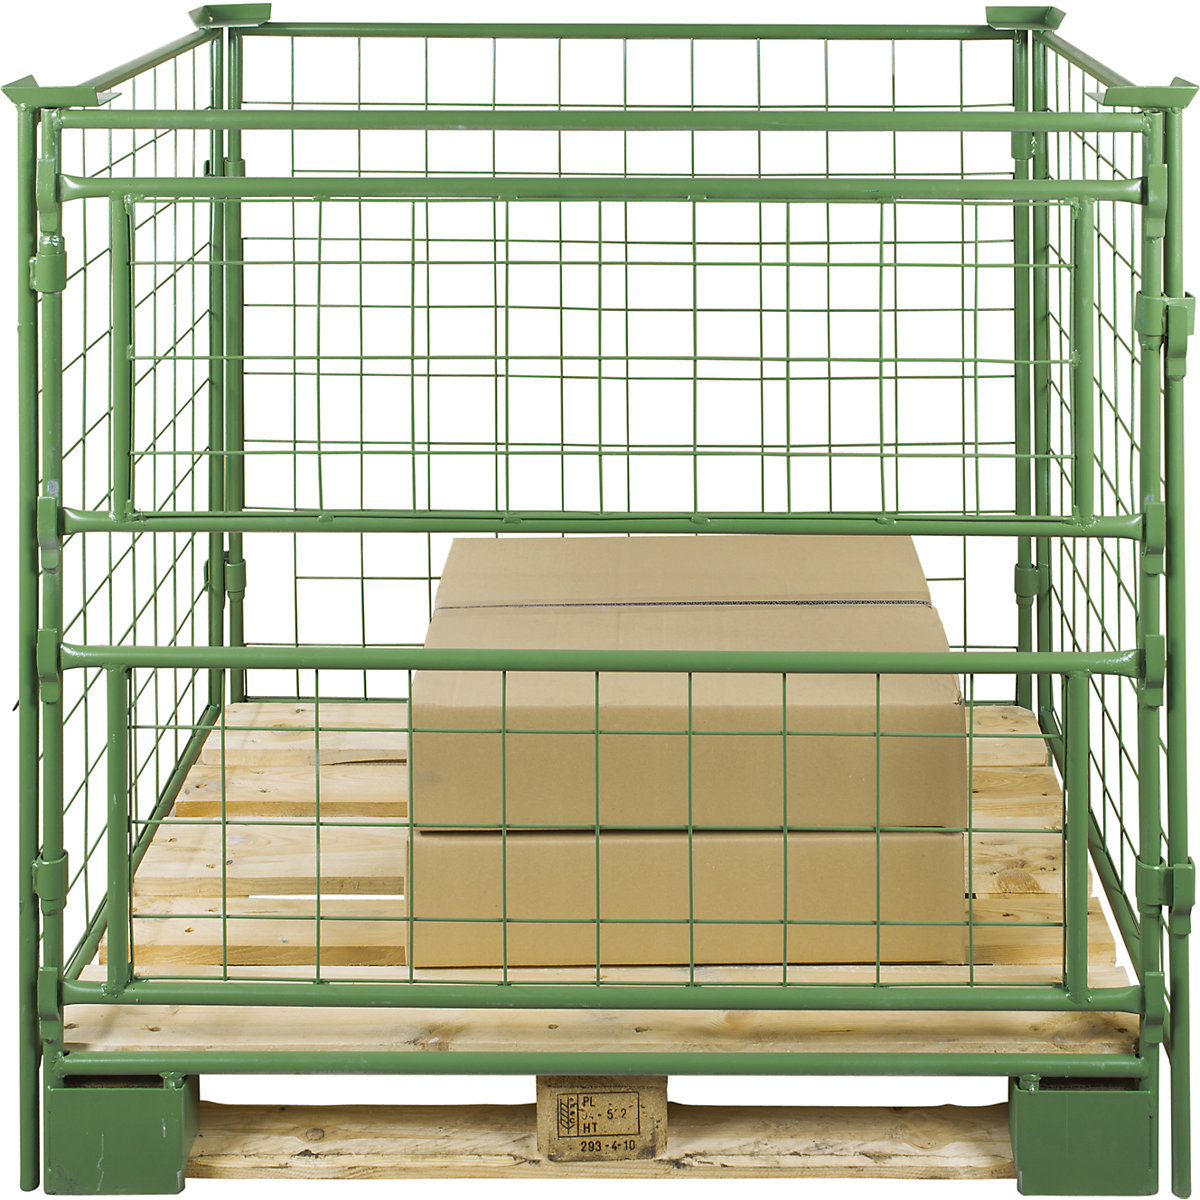 Pallet frame, effective height 1800 mm, for attaching, WxL 800 x 1200 mm, 1 long side with 2 parts, removable-3